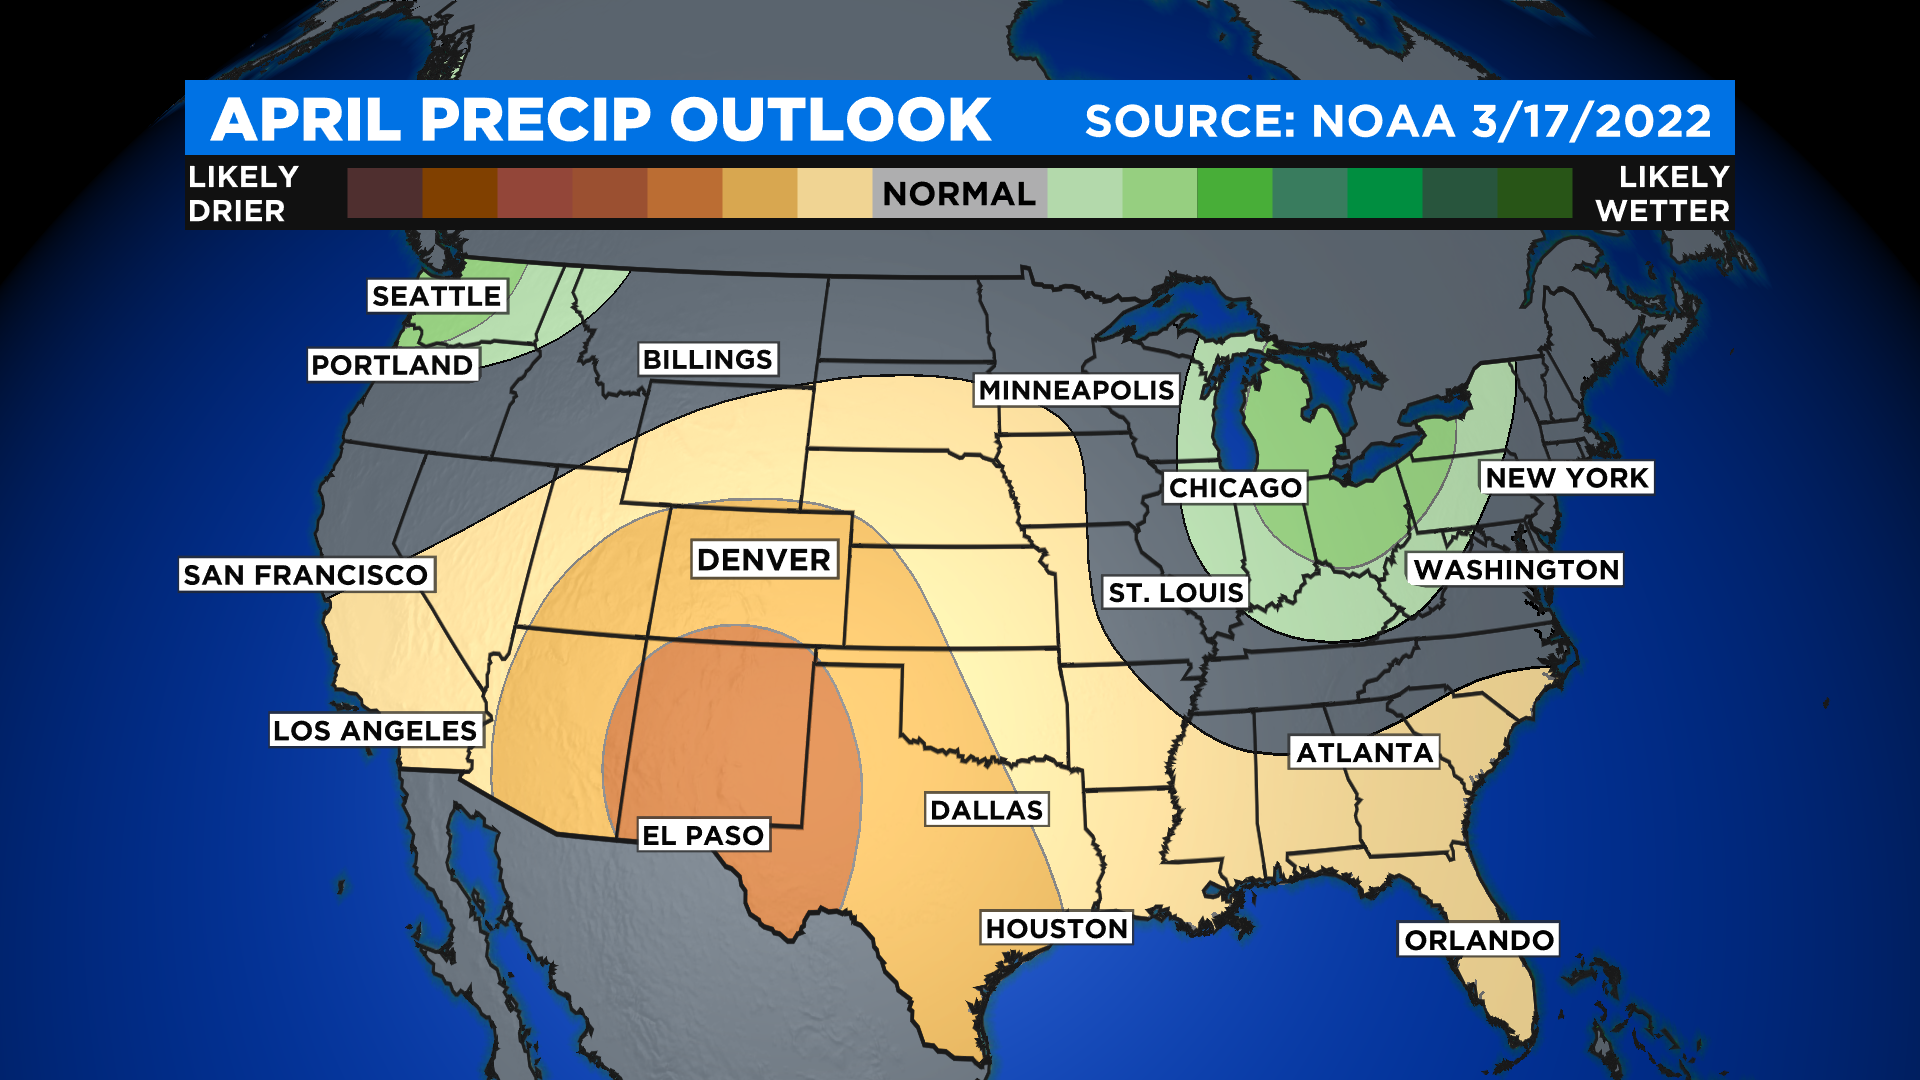 April Weather Outlook From NOAA Brings Some 'Iffy' News For Colorado's